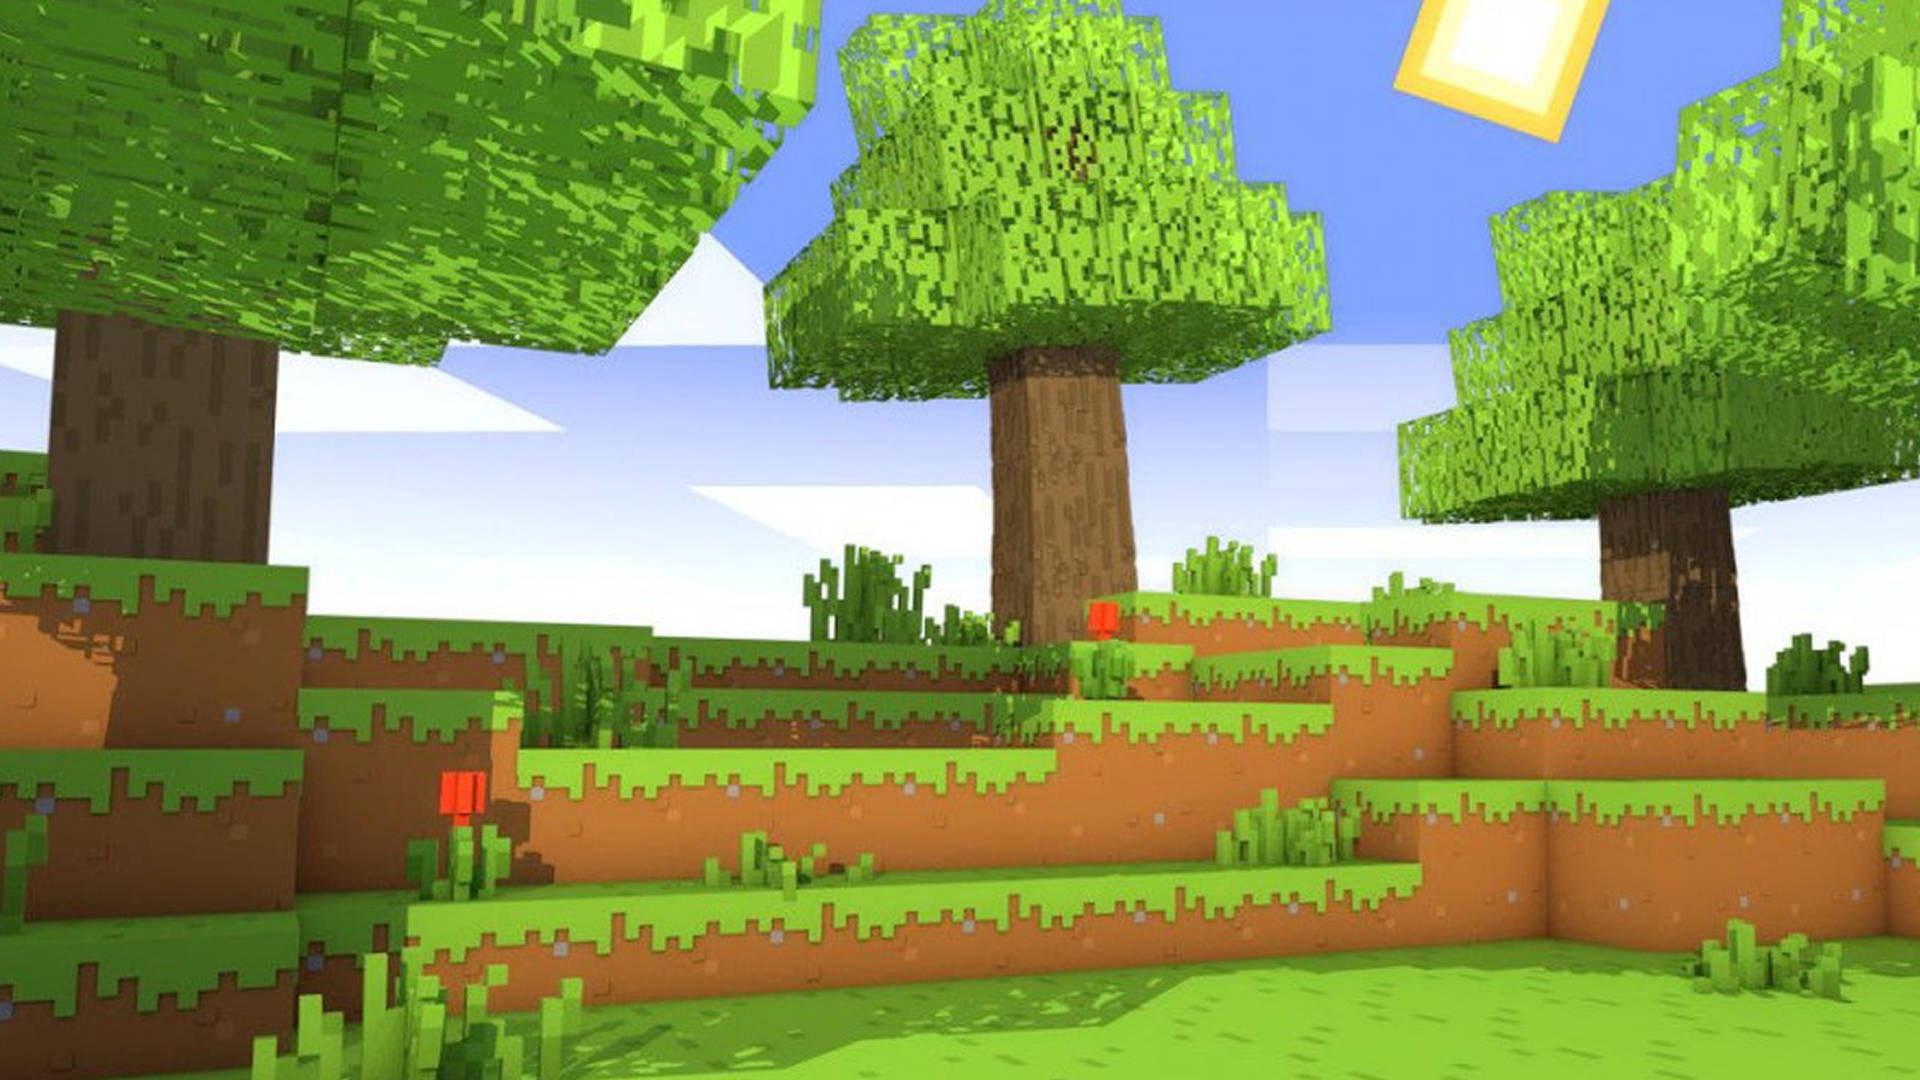 Grass With Trees 2560x1440 Minecraft Wallpaper